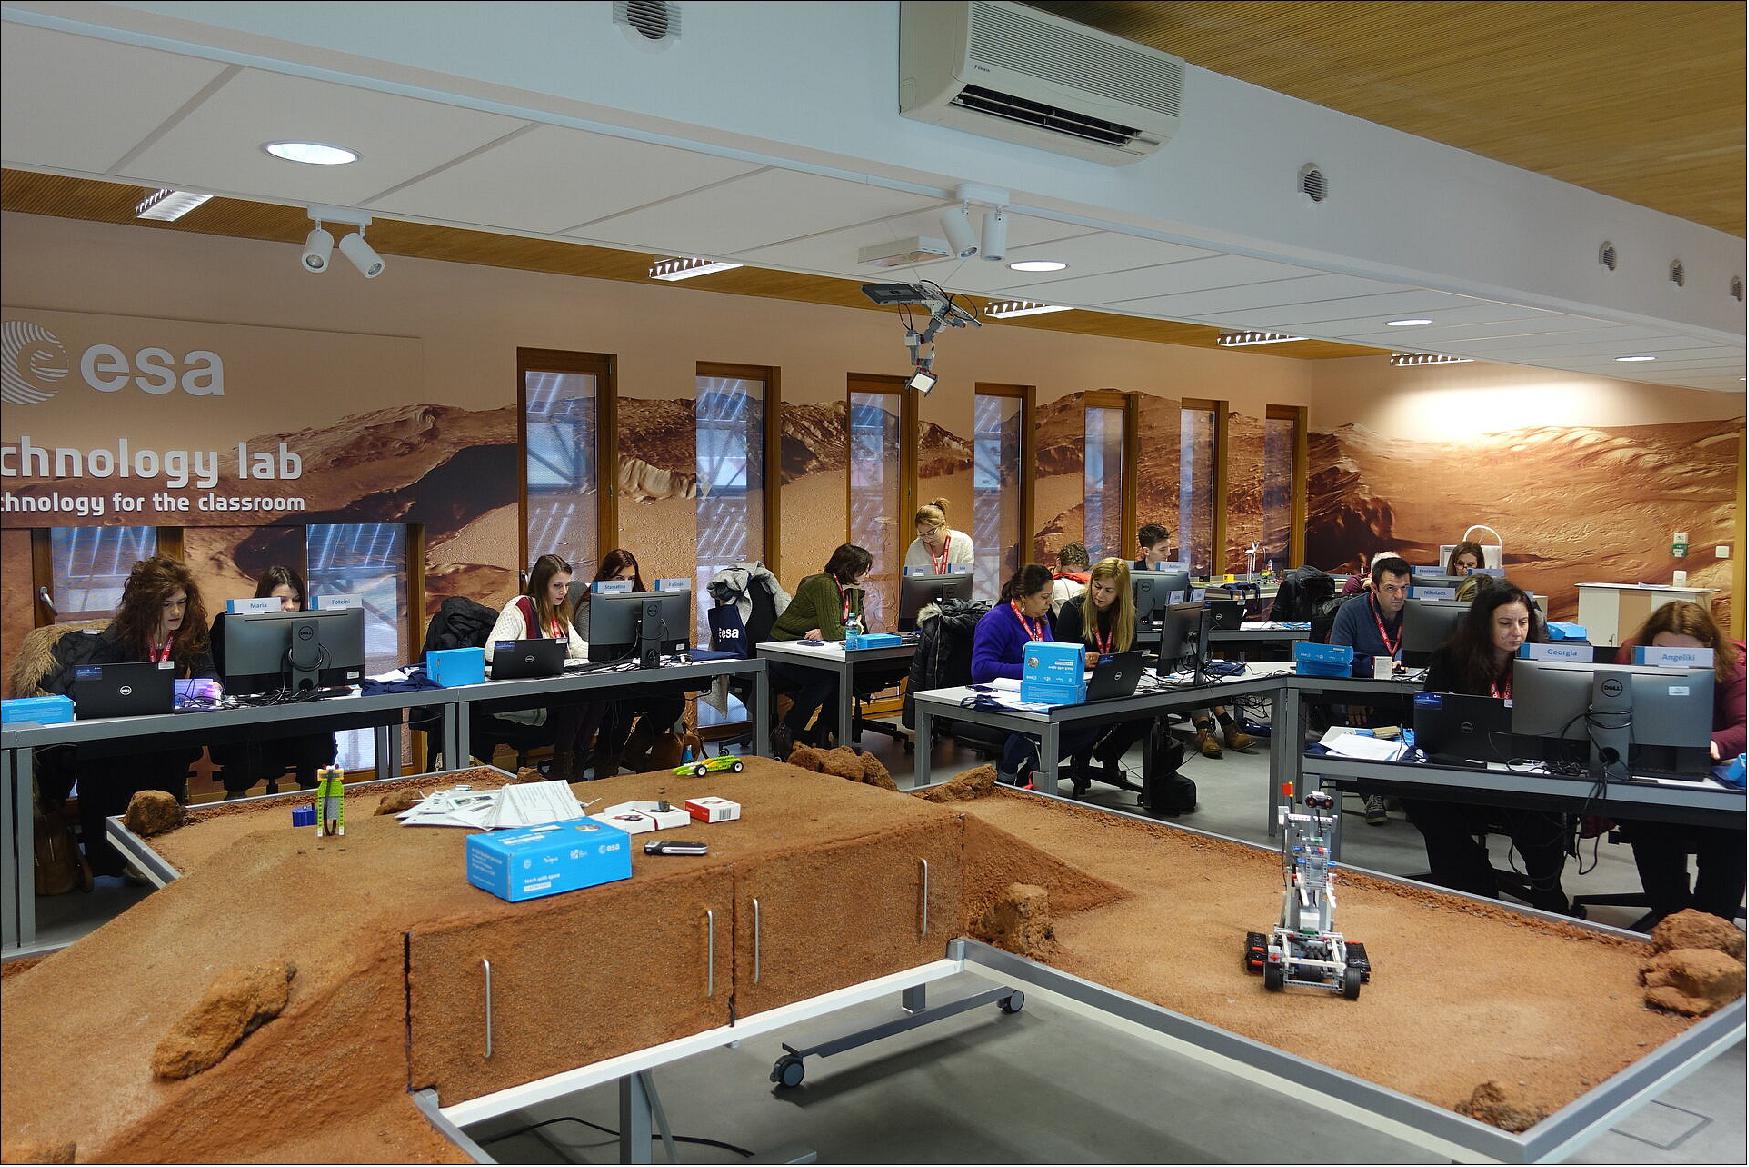 Figure 3: A general view of the e-technology lab and Primary School Teachers programming Astro Pi microcomputers (image credit: ESA)